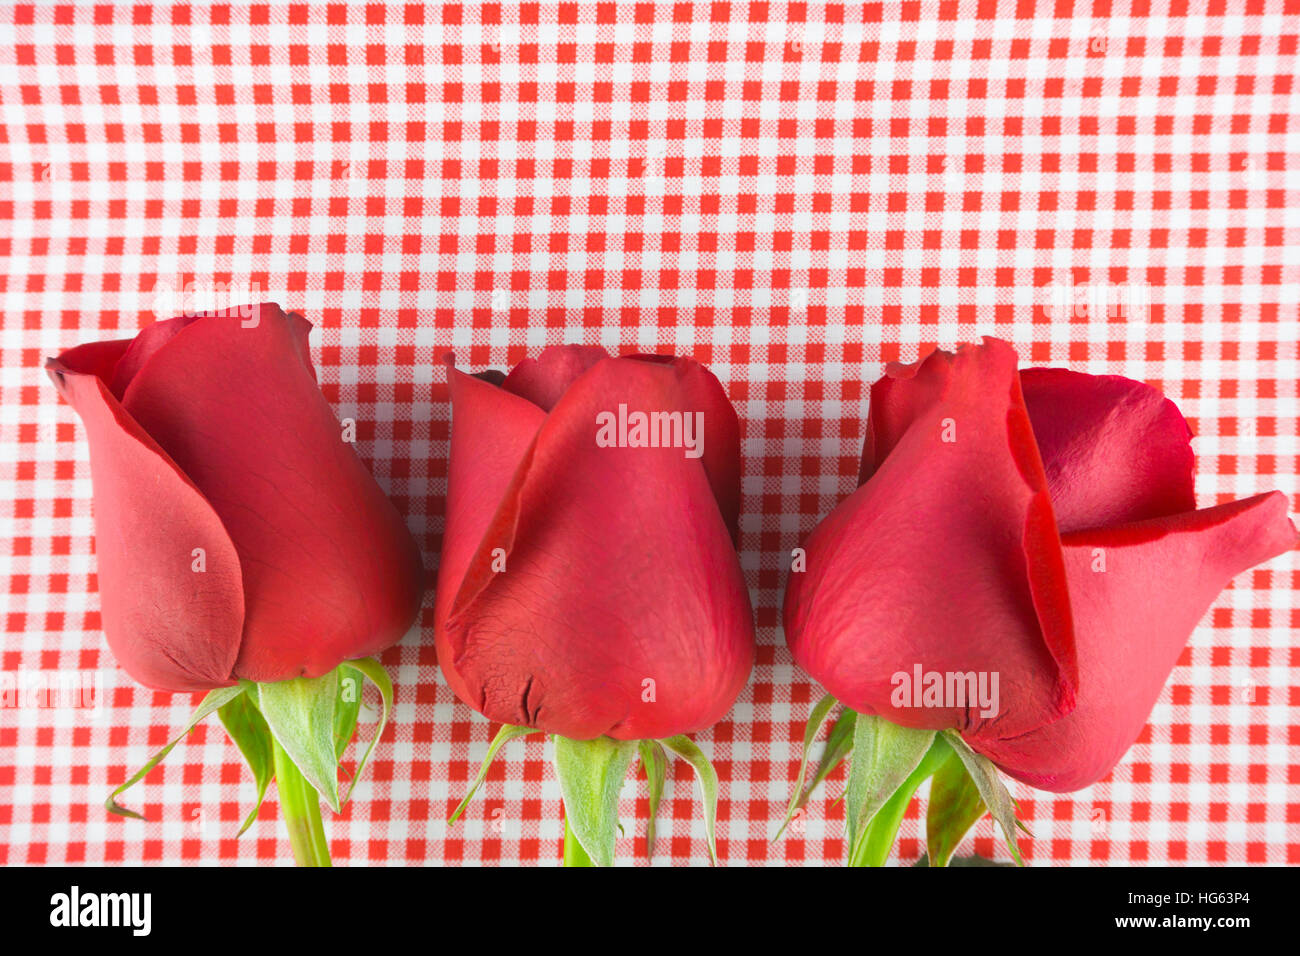 Red rose  image of Valentines day . Stock Photo